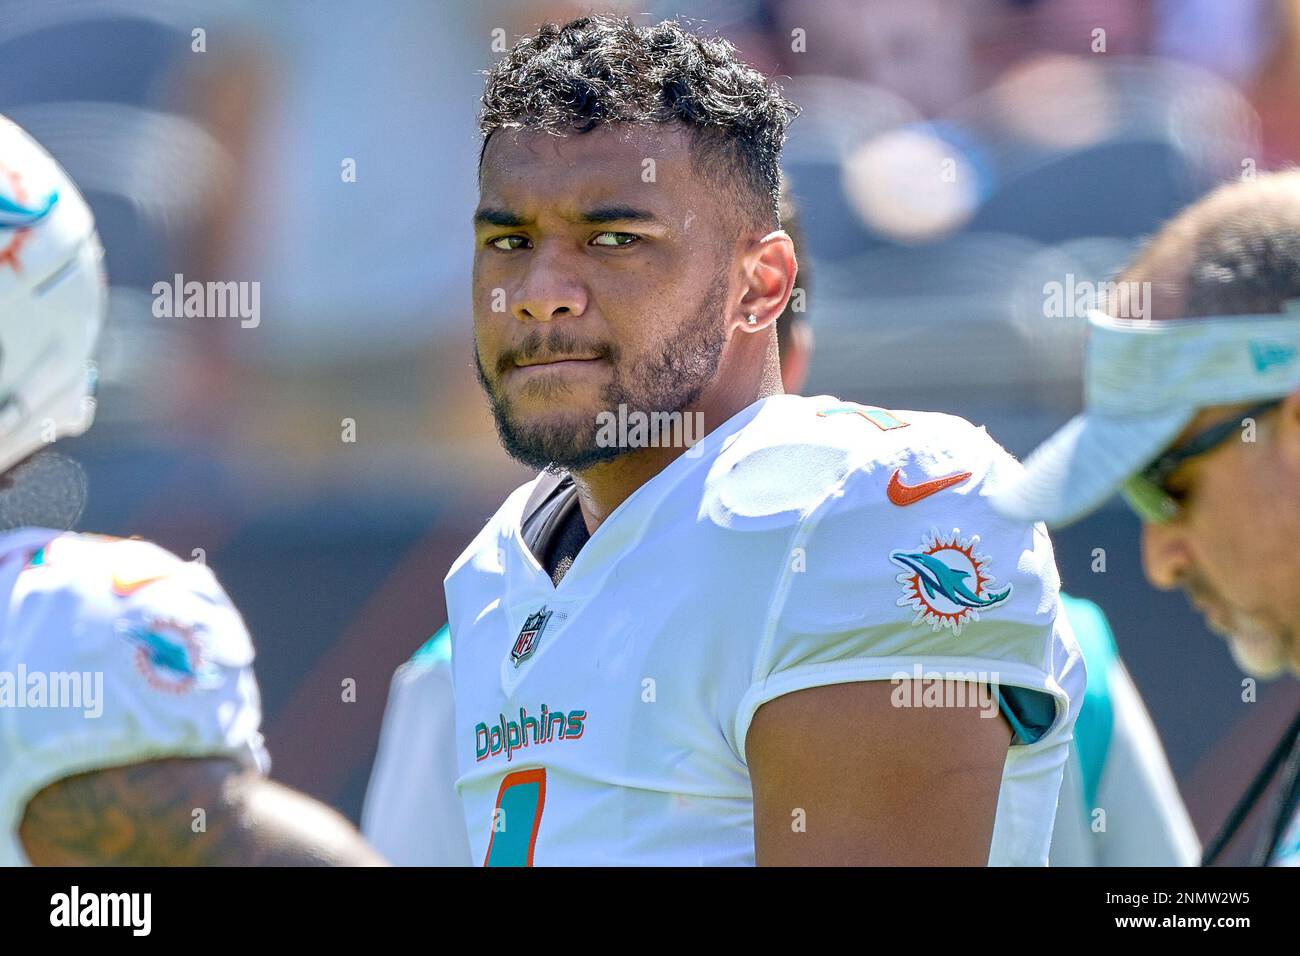 CHICAGO, IL - AUGUST 14: Miami Dolphins quarterback Tua Tagovailoa (1)  throws the football in warmups during a preseason game between the Chicago  Bears and the Miami Dolphins on August 14, 2021